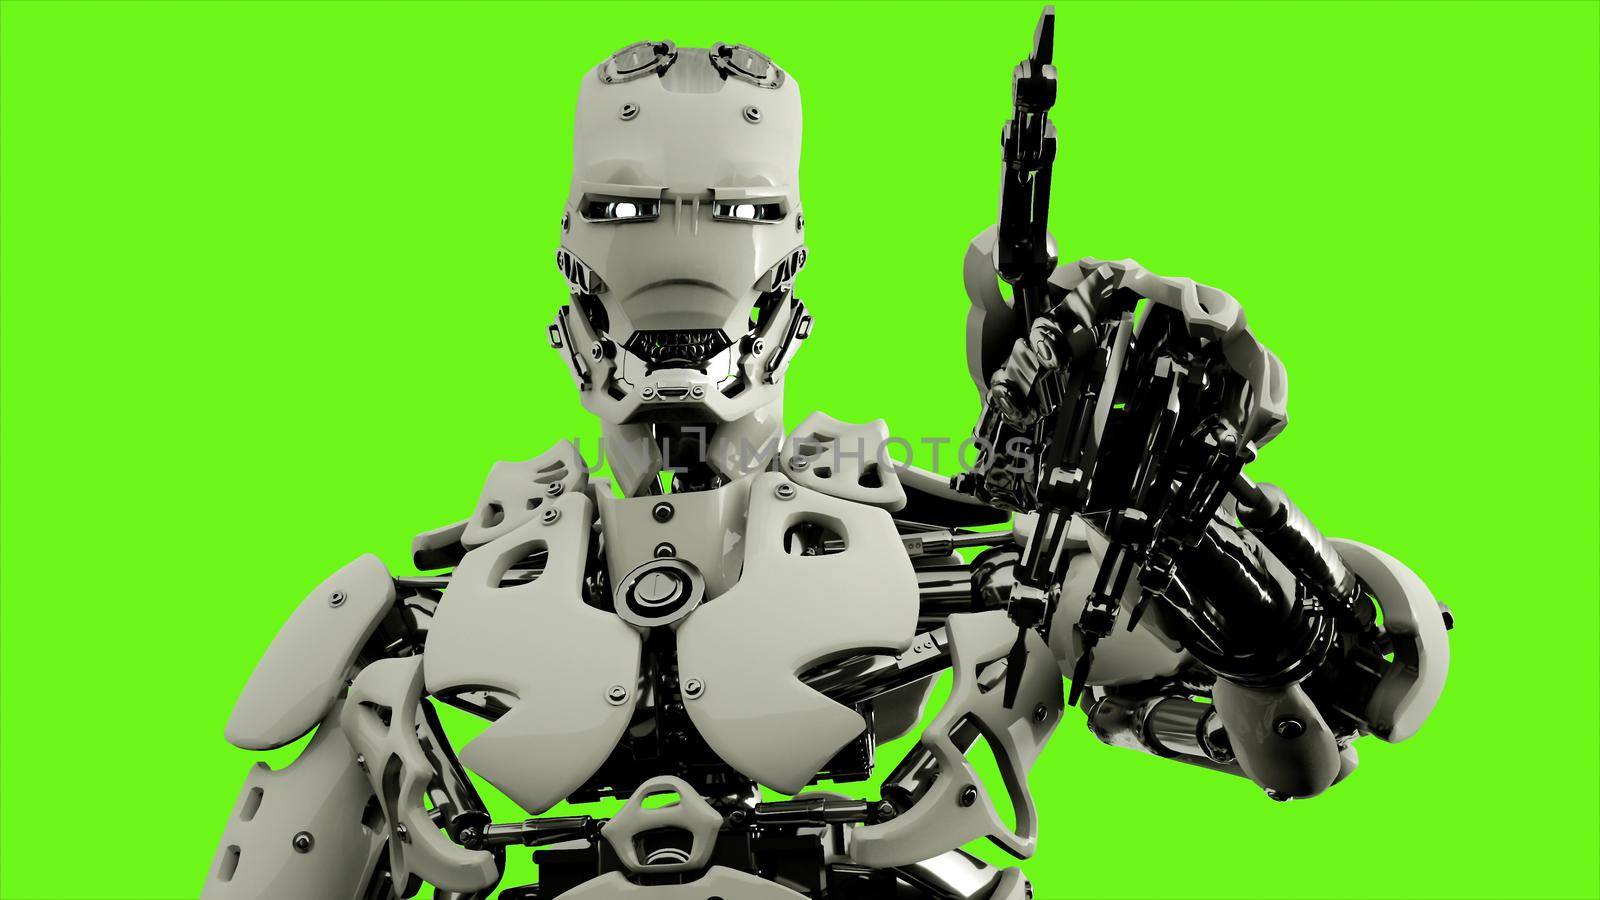 Robot android presses the keys. Illustration on green screen background.